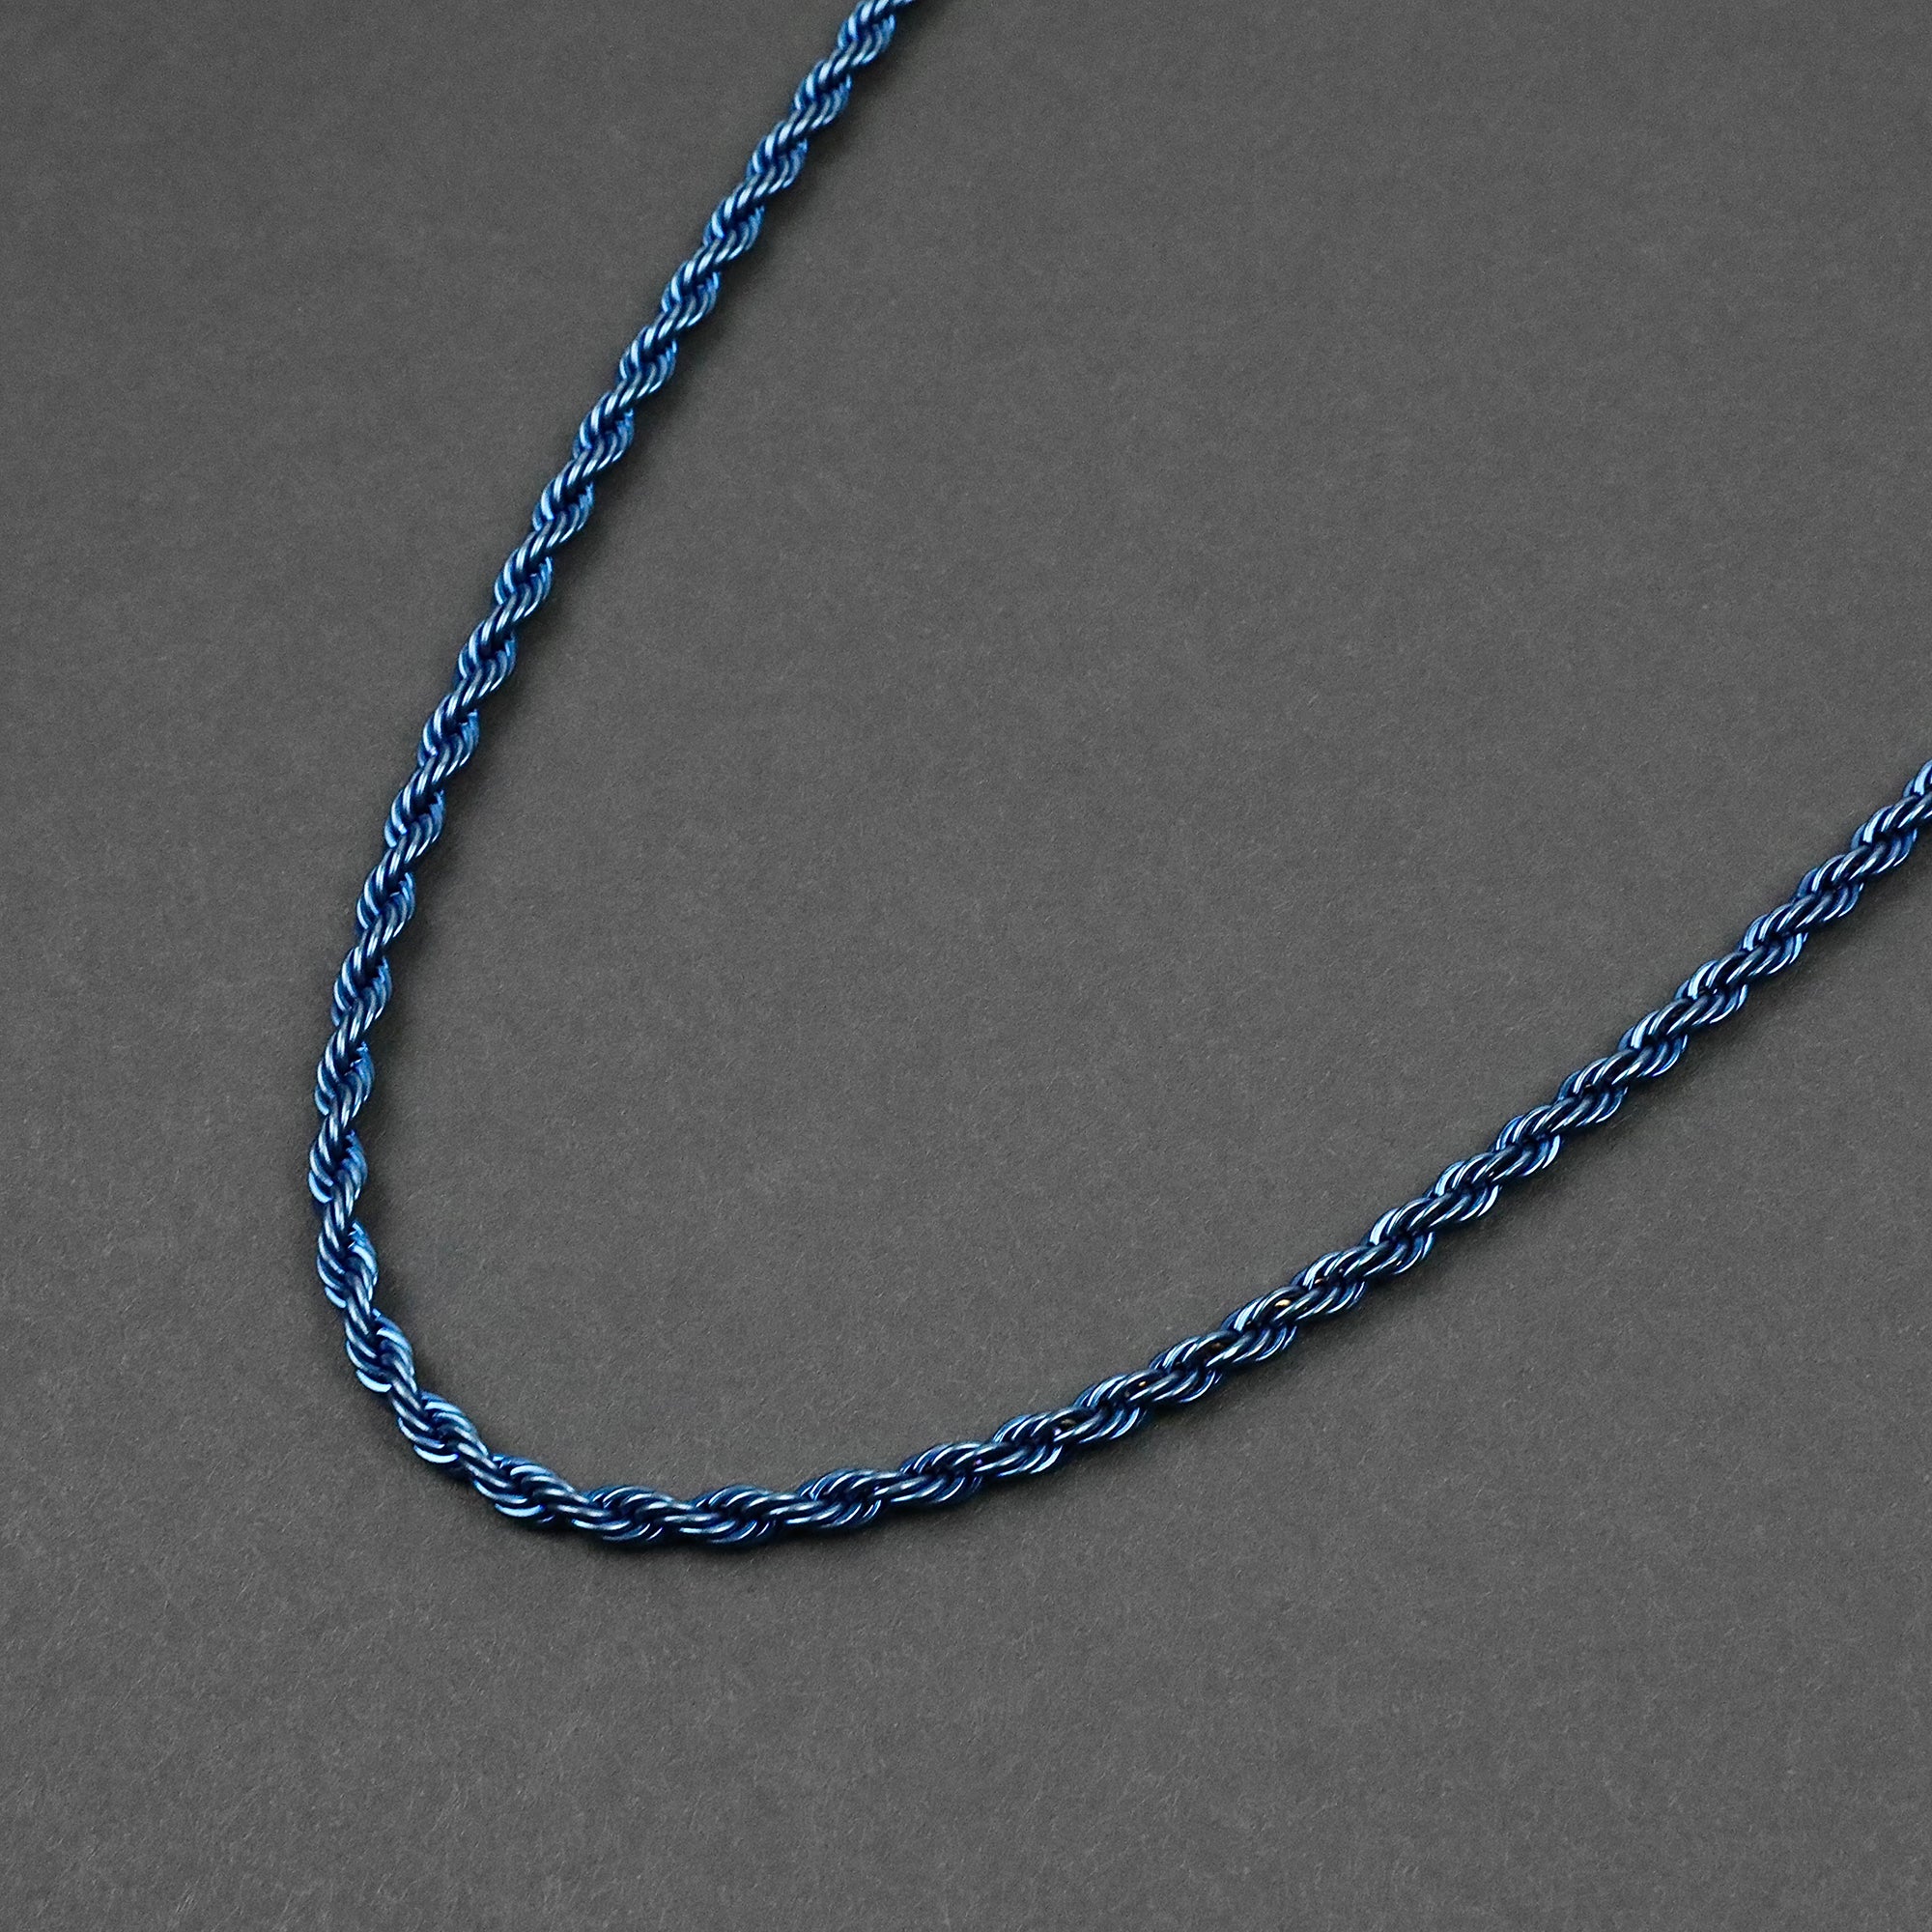 Rope Chain Necklace - Cobalt Blue 4mm